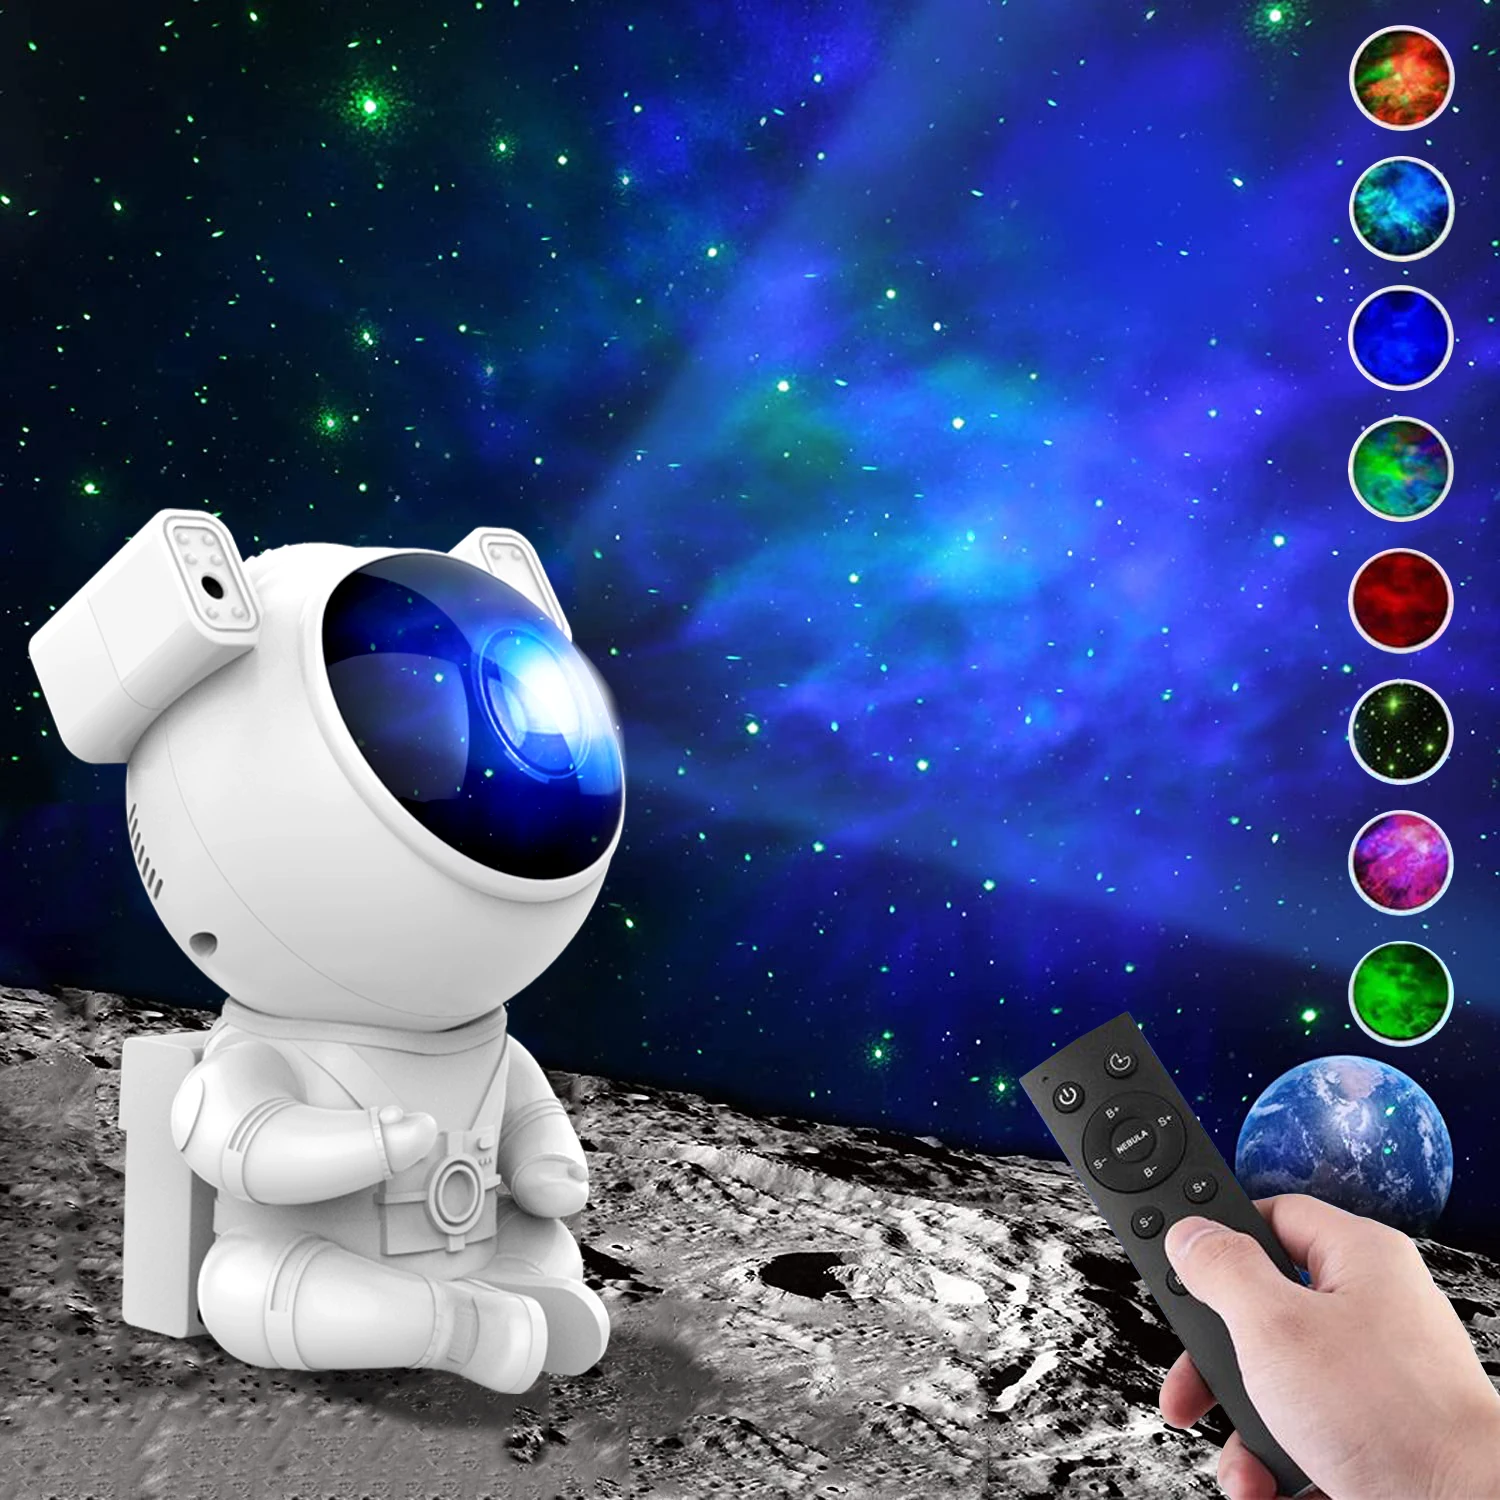 

Galaxy Star Projector Night Light With Remote Control 360°Adjustable Sitting Astronaut Design Home Decor Kids Christmas Gifts